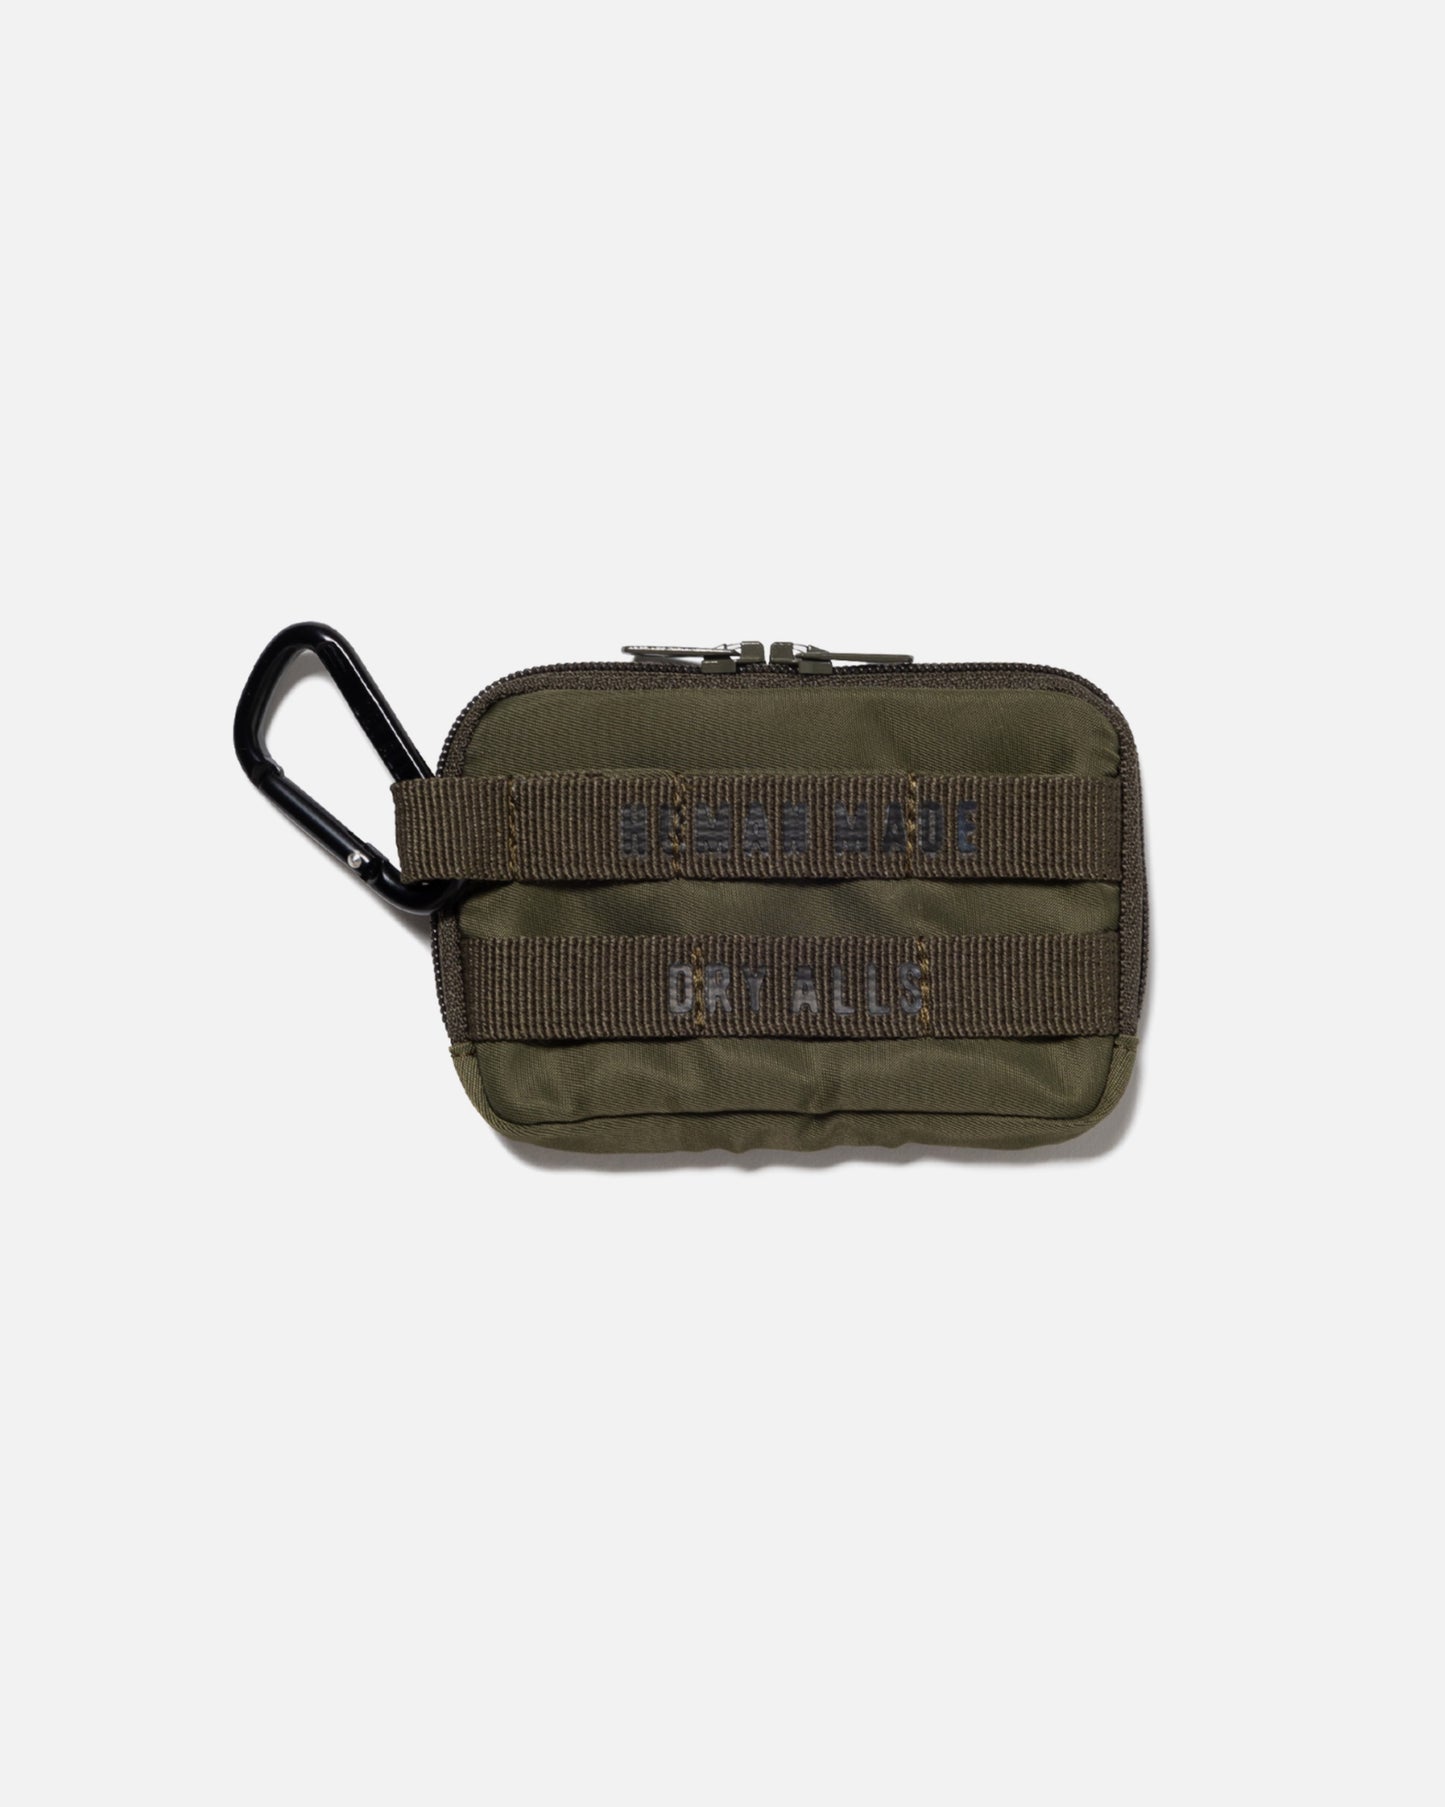 MILITARY CARD CASE (OLIVE DRAB)